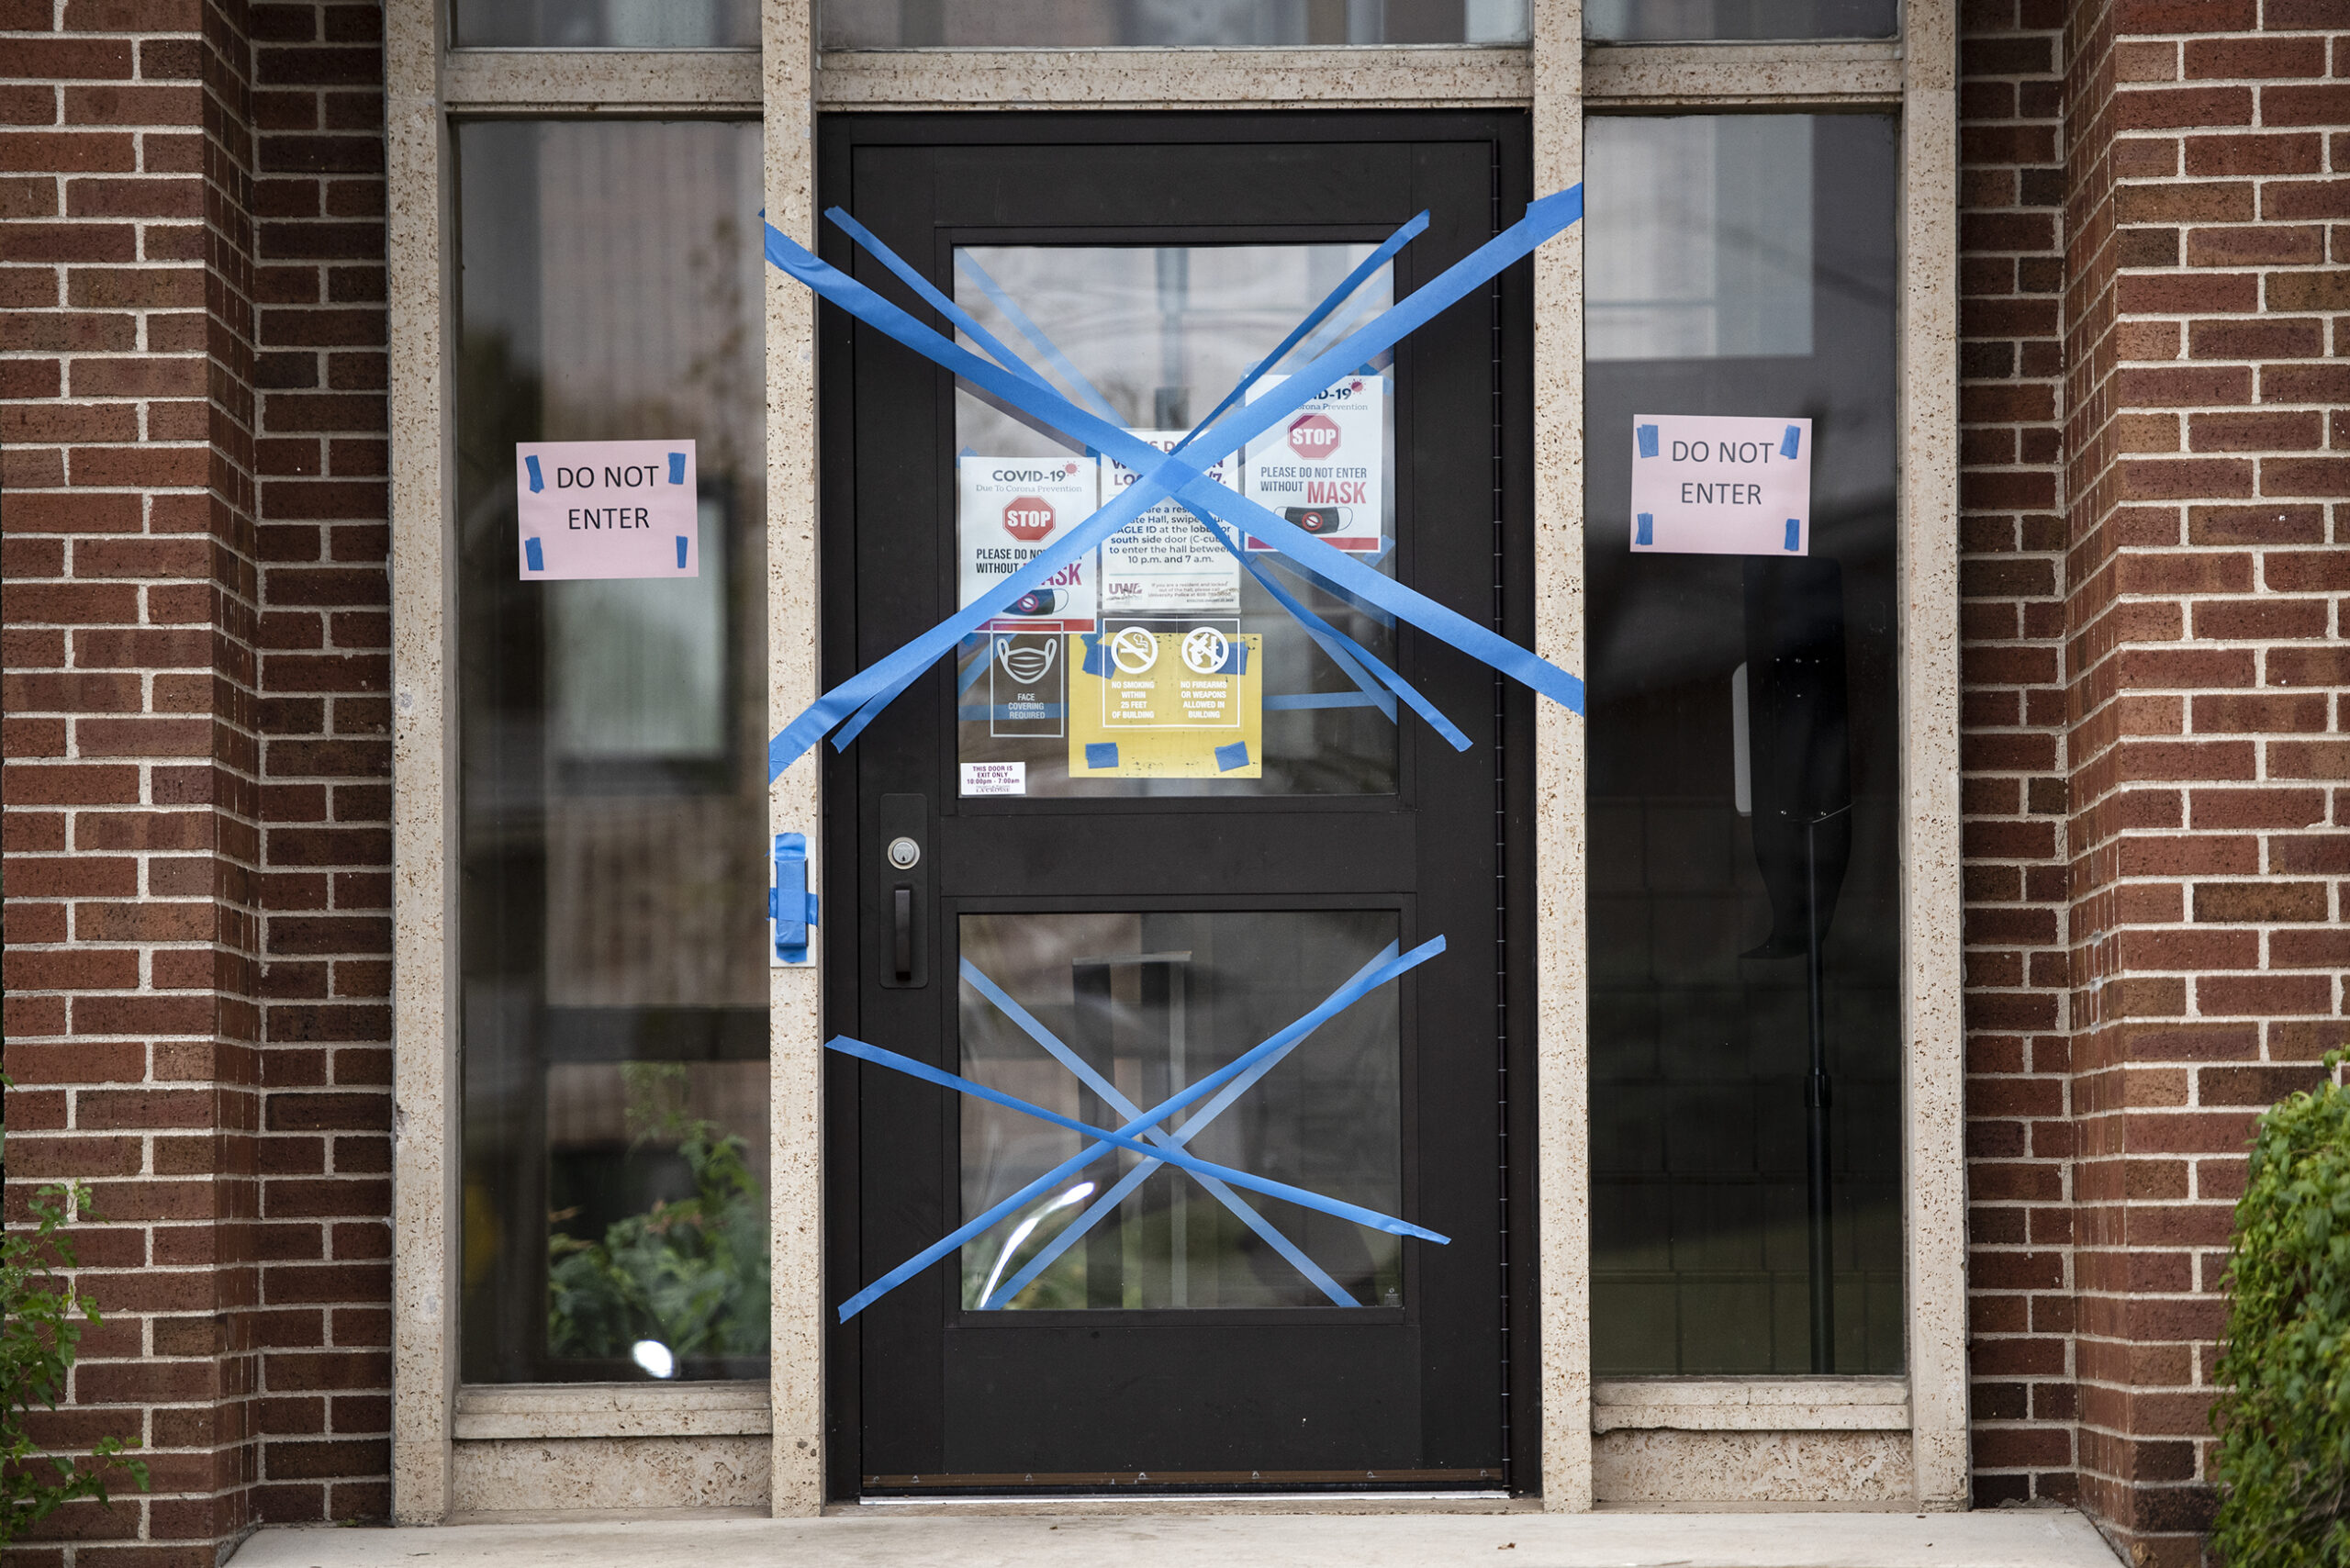 Blue painter's tape blocks off a doorway. several signs indicate that people should not enter.